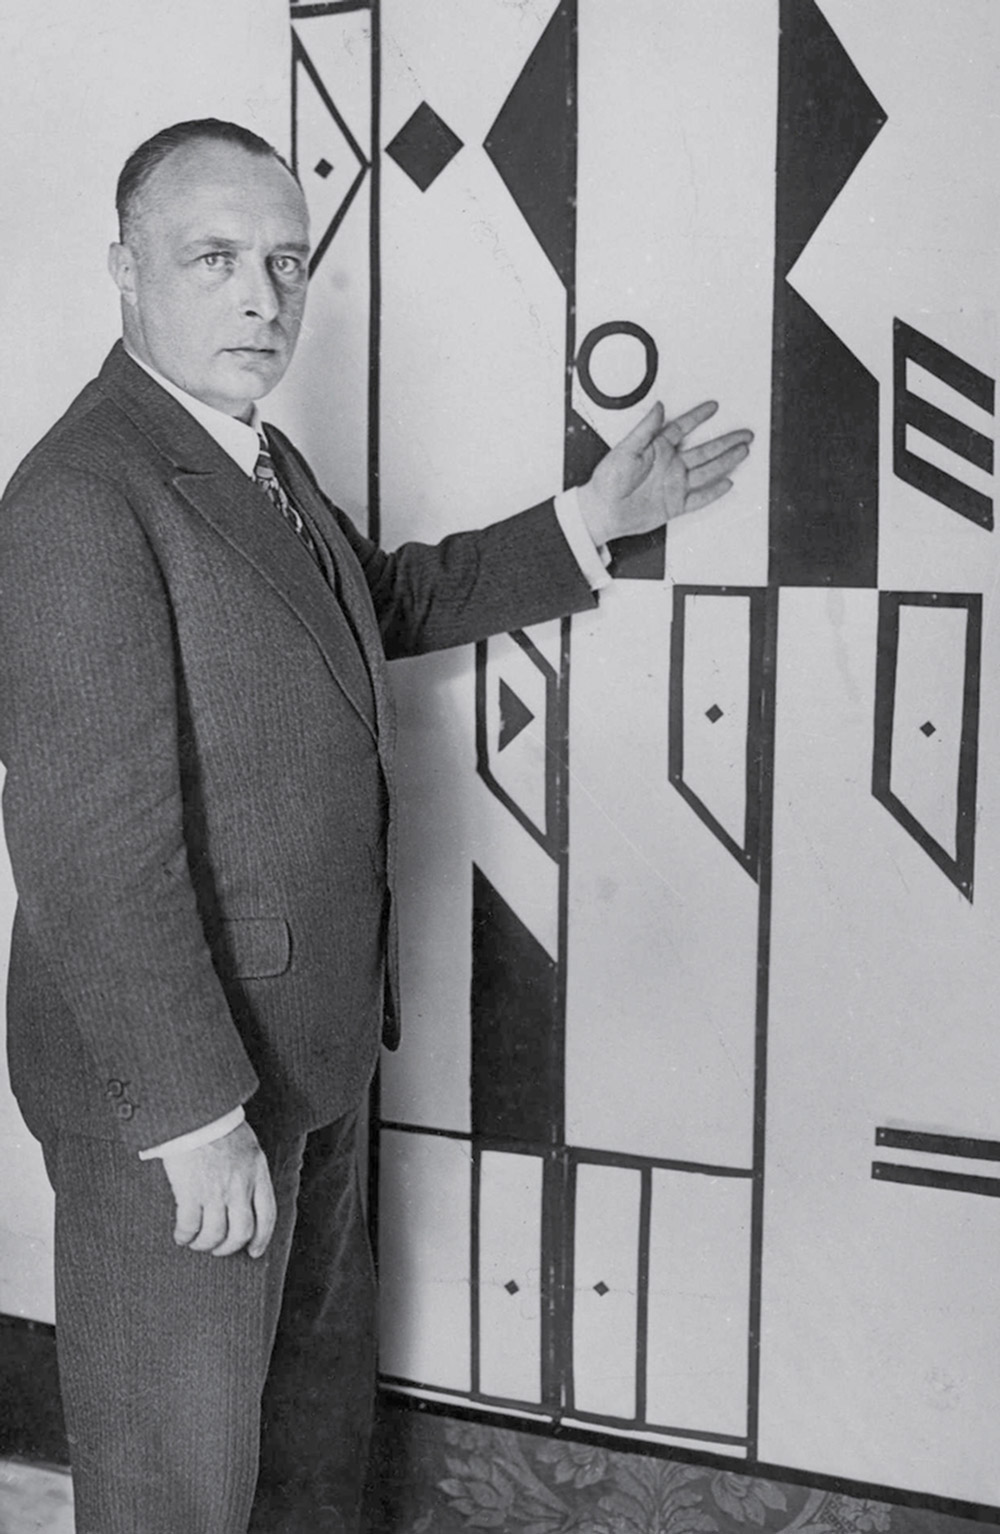 A 1928 photograph of Rudolf von Laban lecturing on his dance notation system.